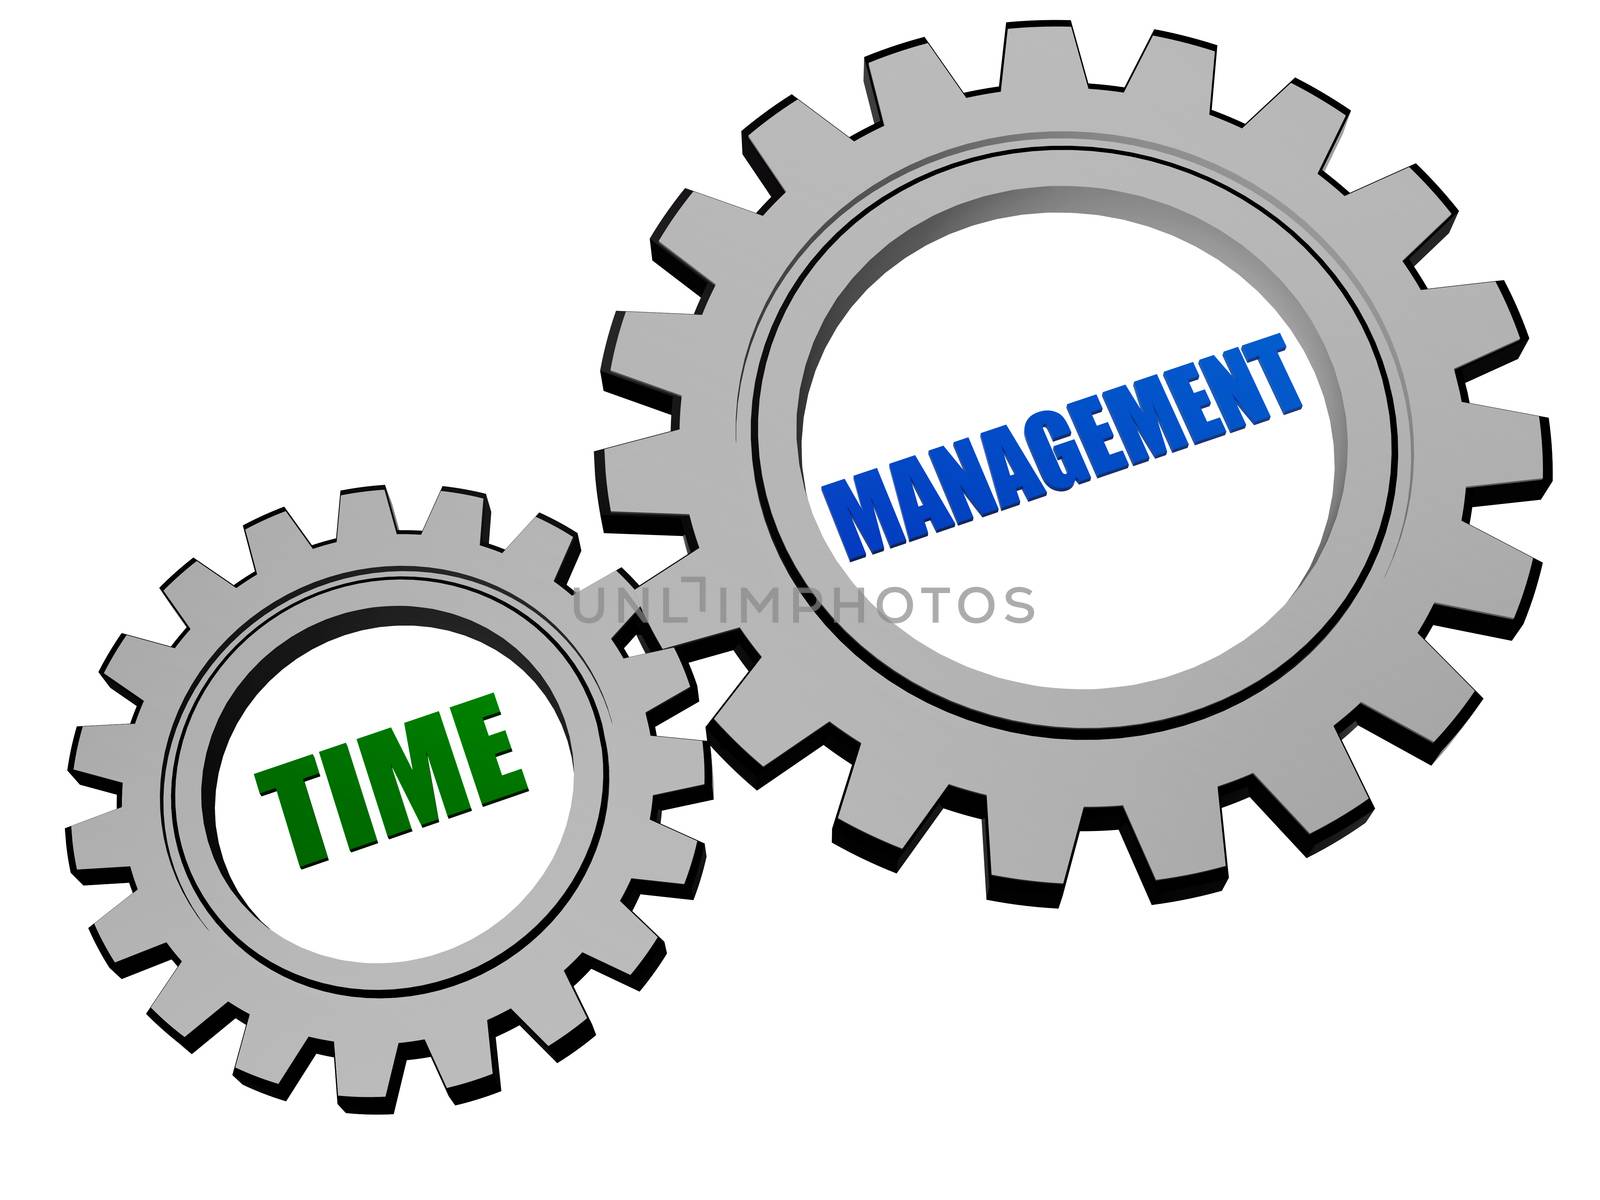 time management - text in 3d silver grey metal gear wheels, business organizing concept